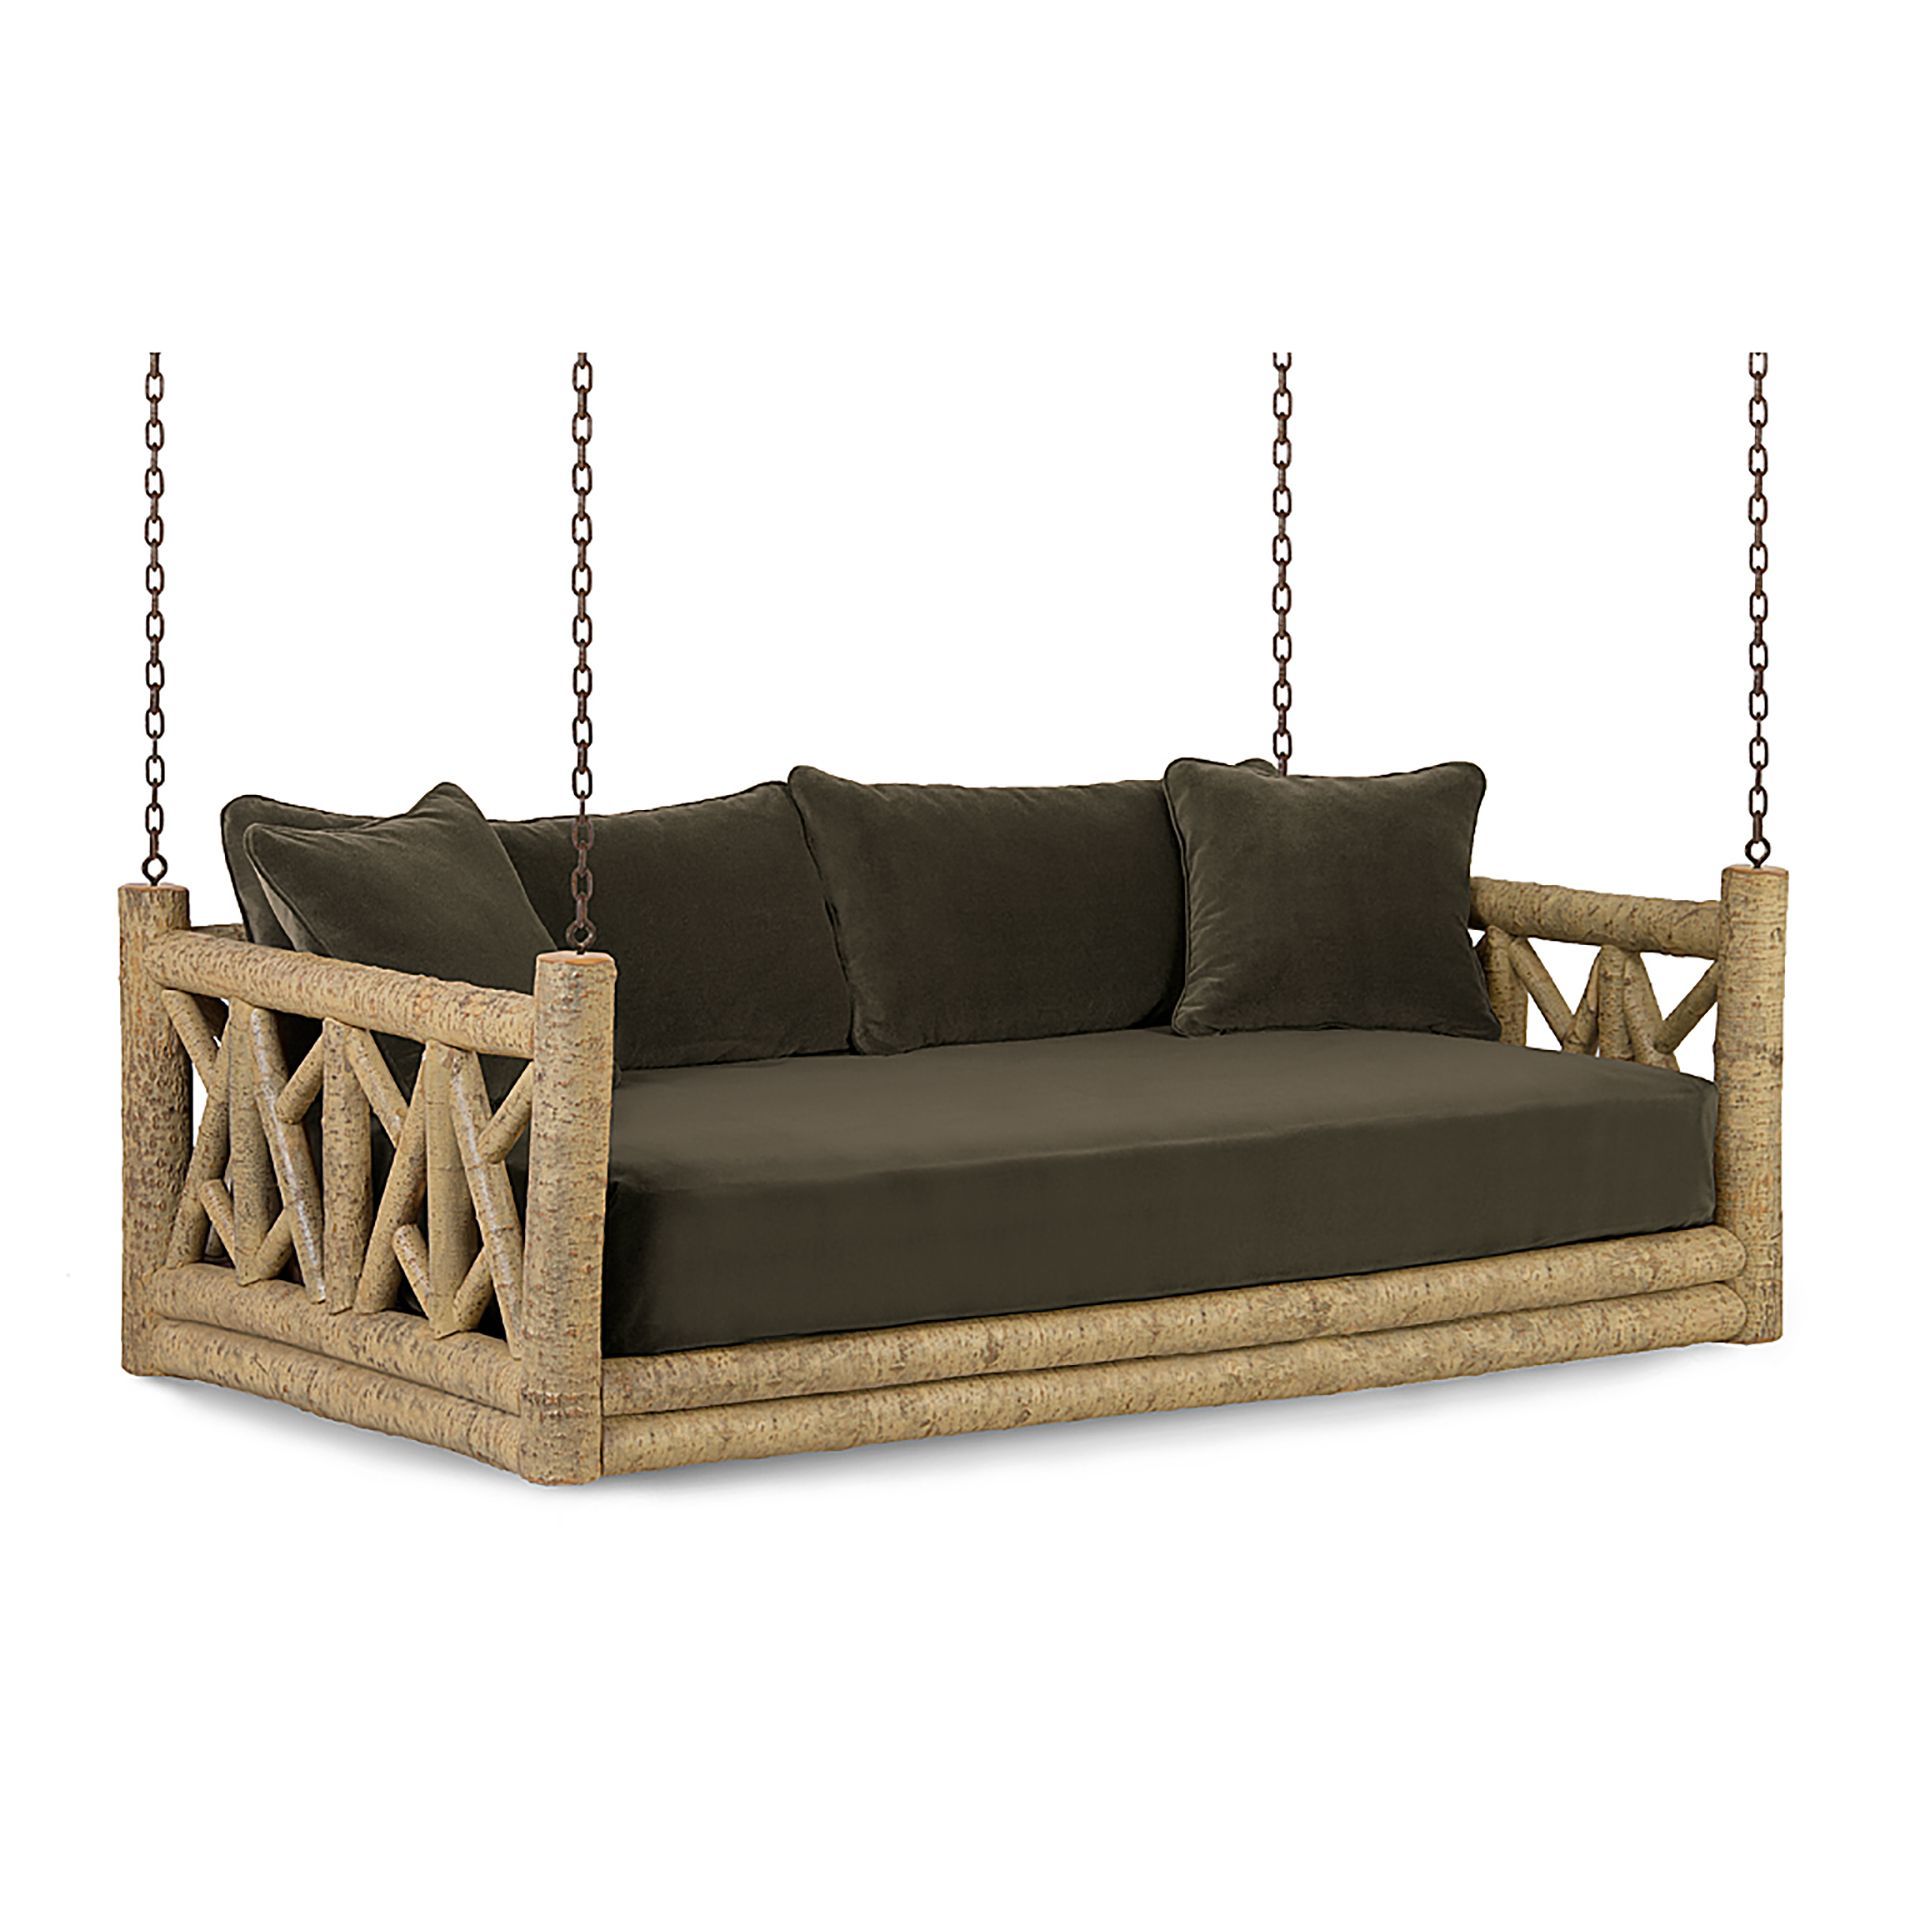 Rustic Hanging Daybed #4635 | Transitional Decor, Porch With Country Style Hanging Daybed Swings (View 2 of 25)